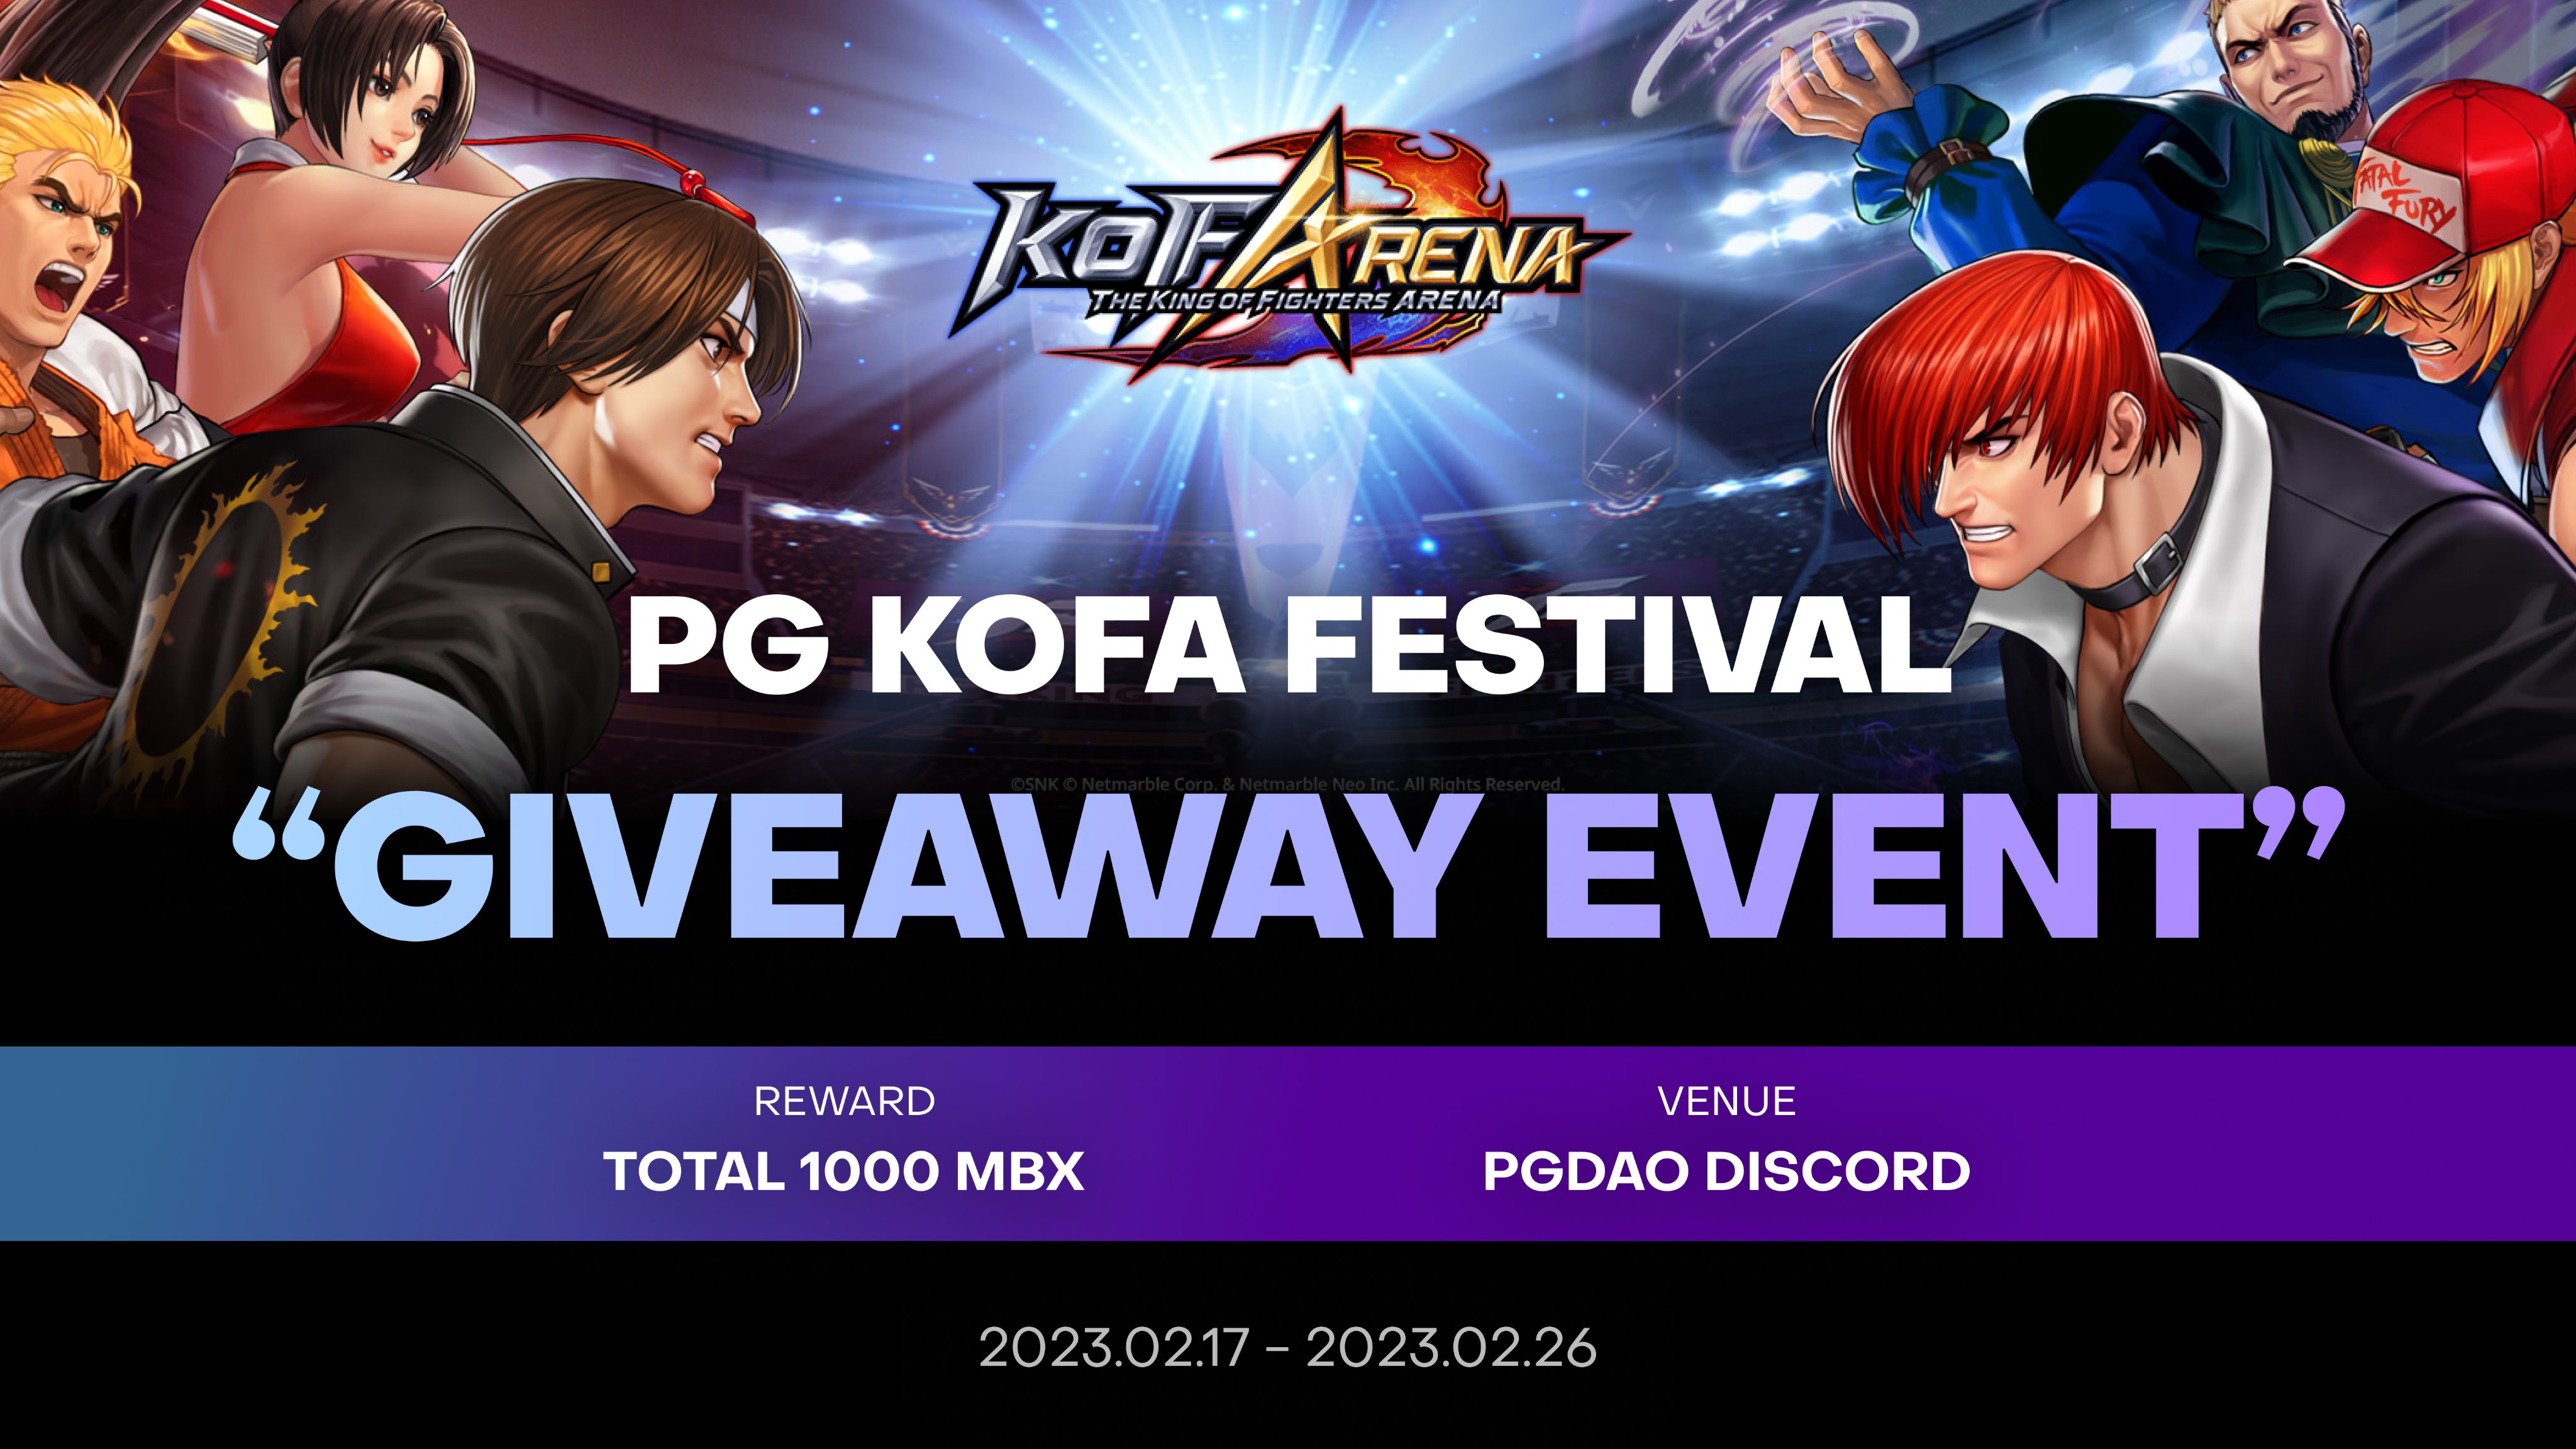 The King of Fighters ARENA APK for Android Download